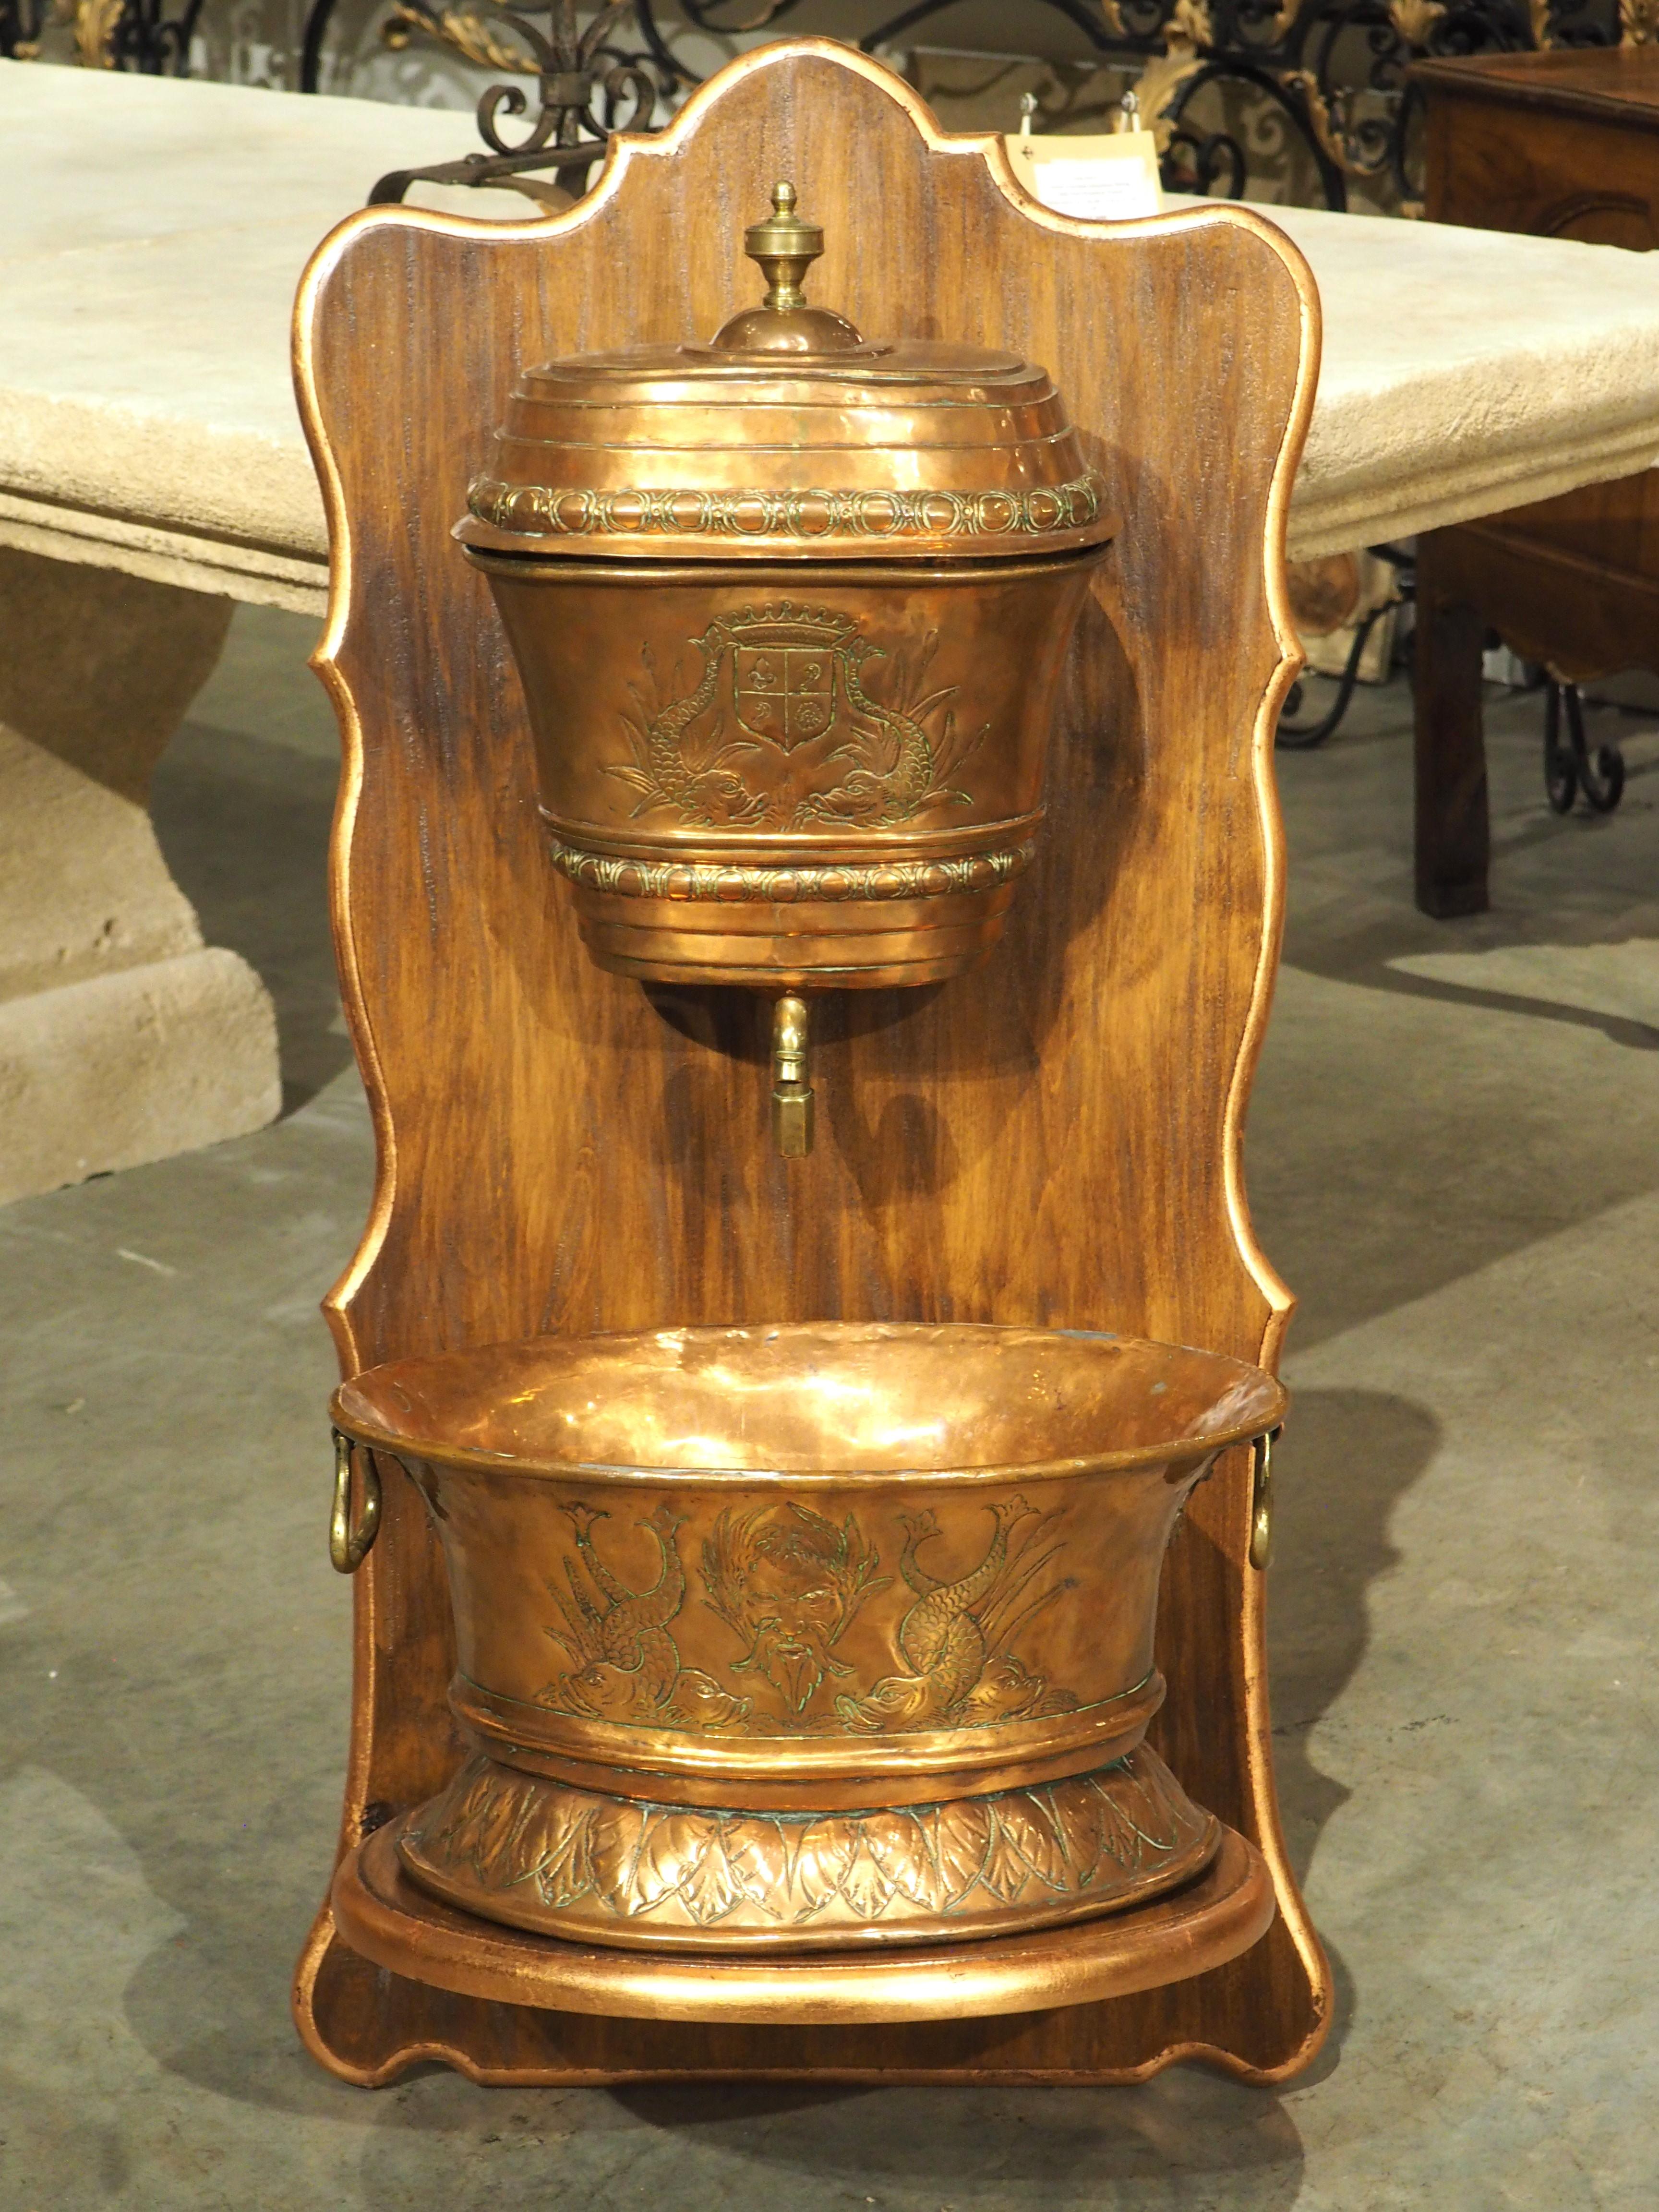 Circa 1800 French Copper Coat of Arms Lavabo with Wooden Mounting For Sale 14